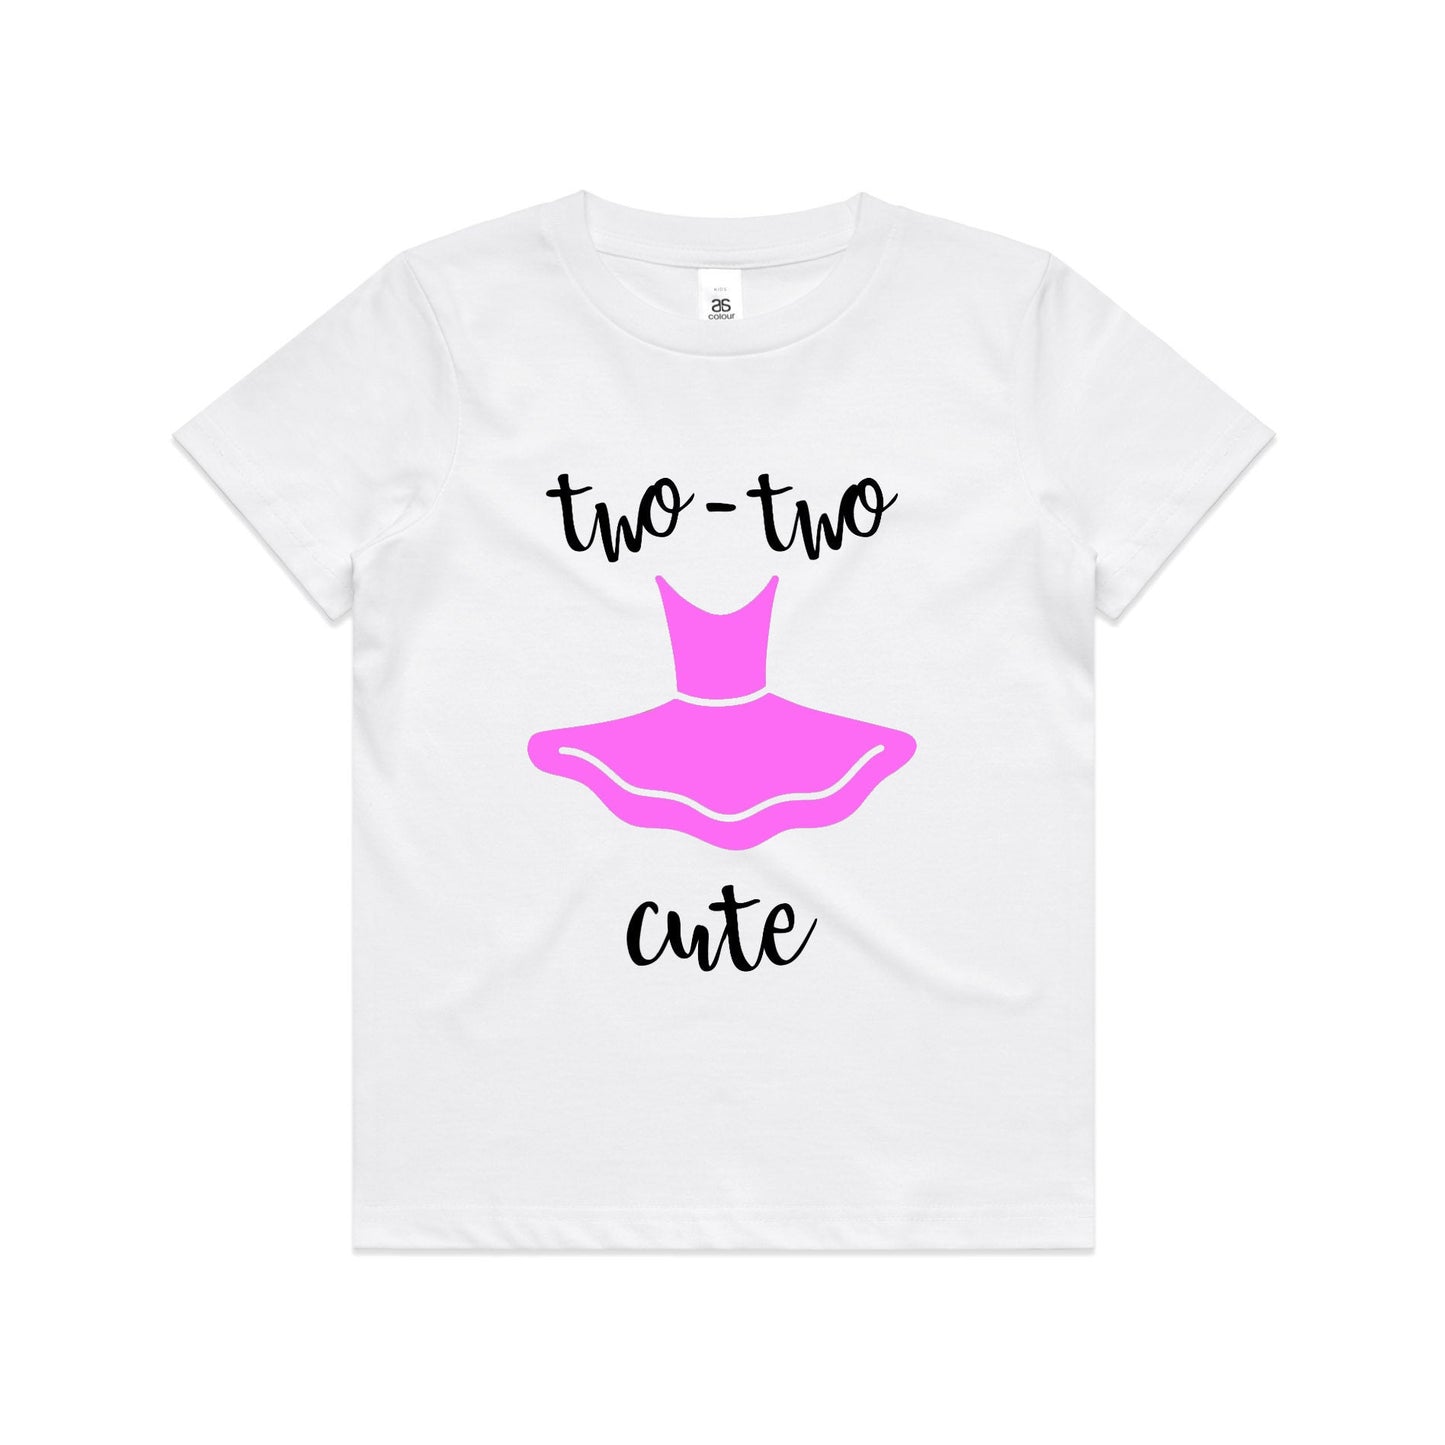 Kid's "Two Two Cute" 2nd Birthday T-Shirt